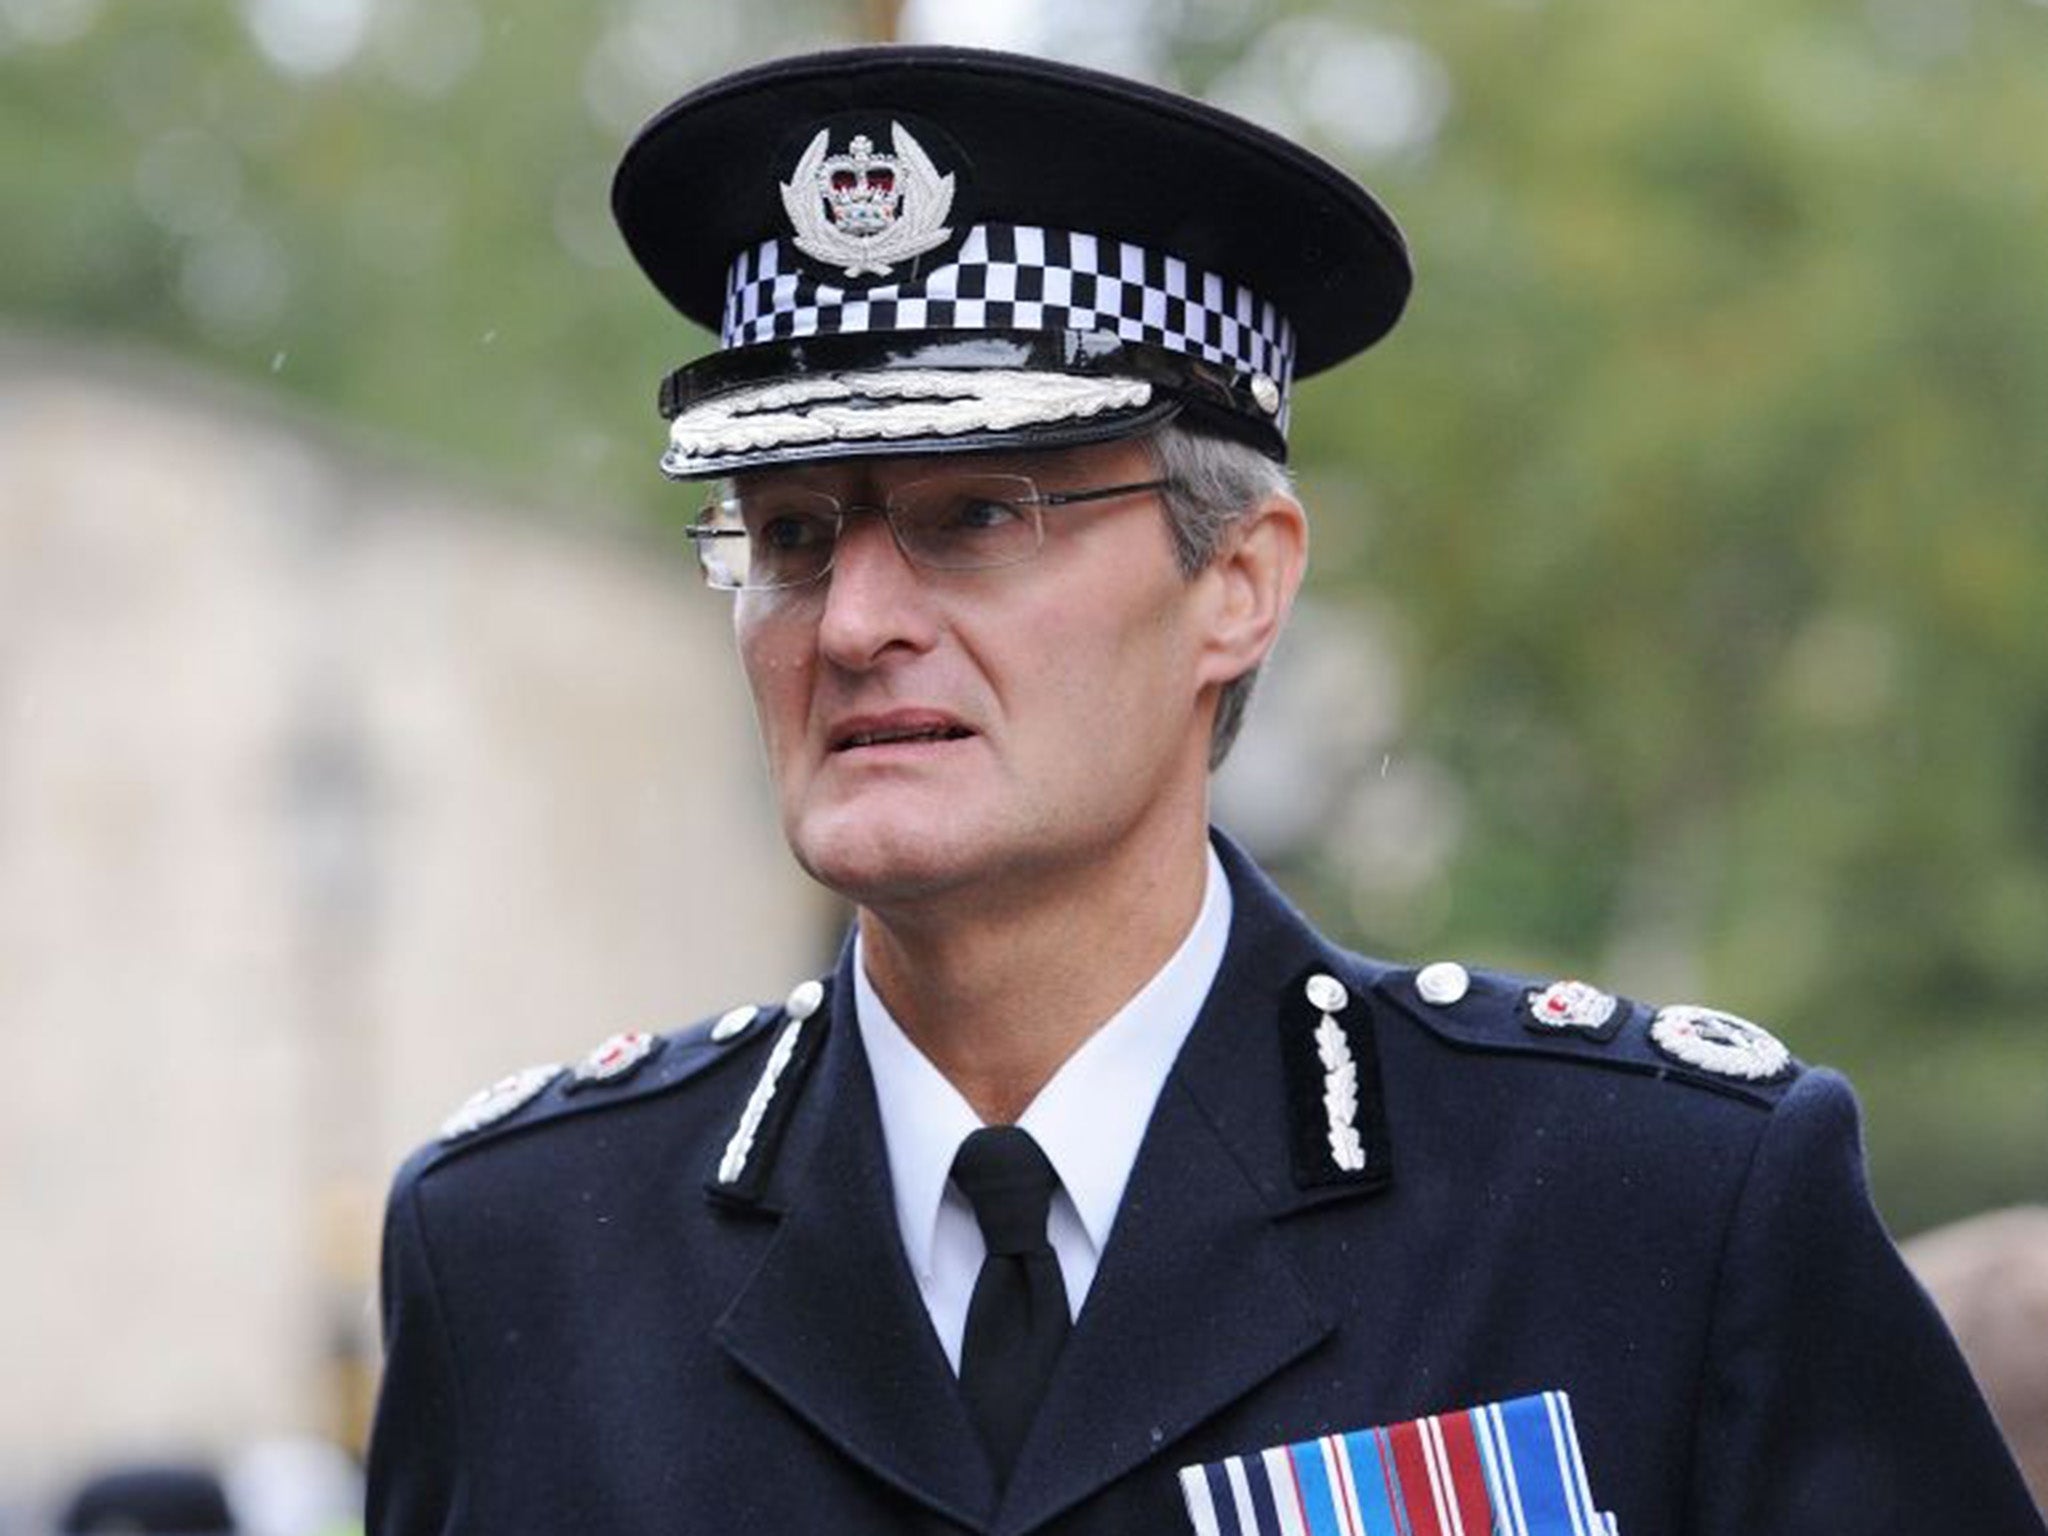 Chief Constable David Constable was accused of directing lawyers to attack the Liverpool fans during the inquest